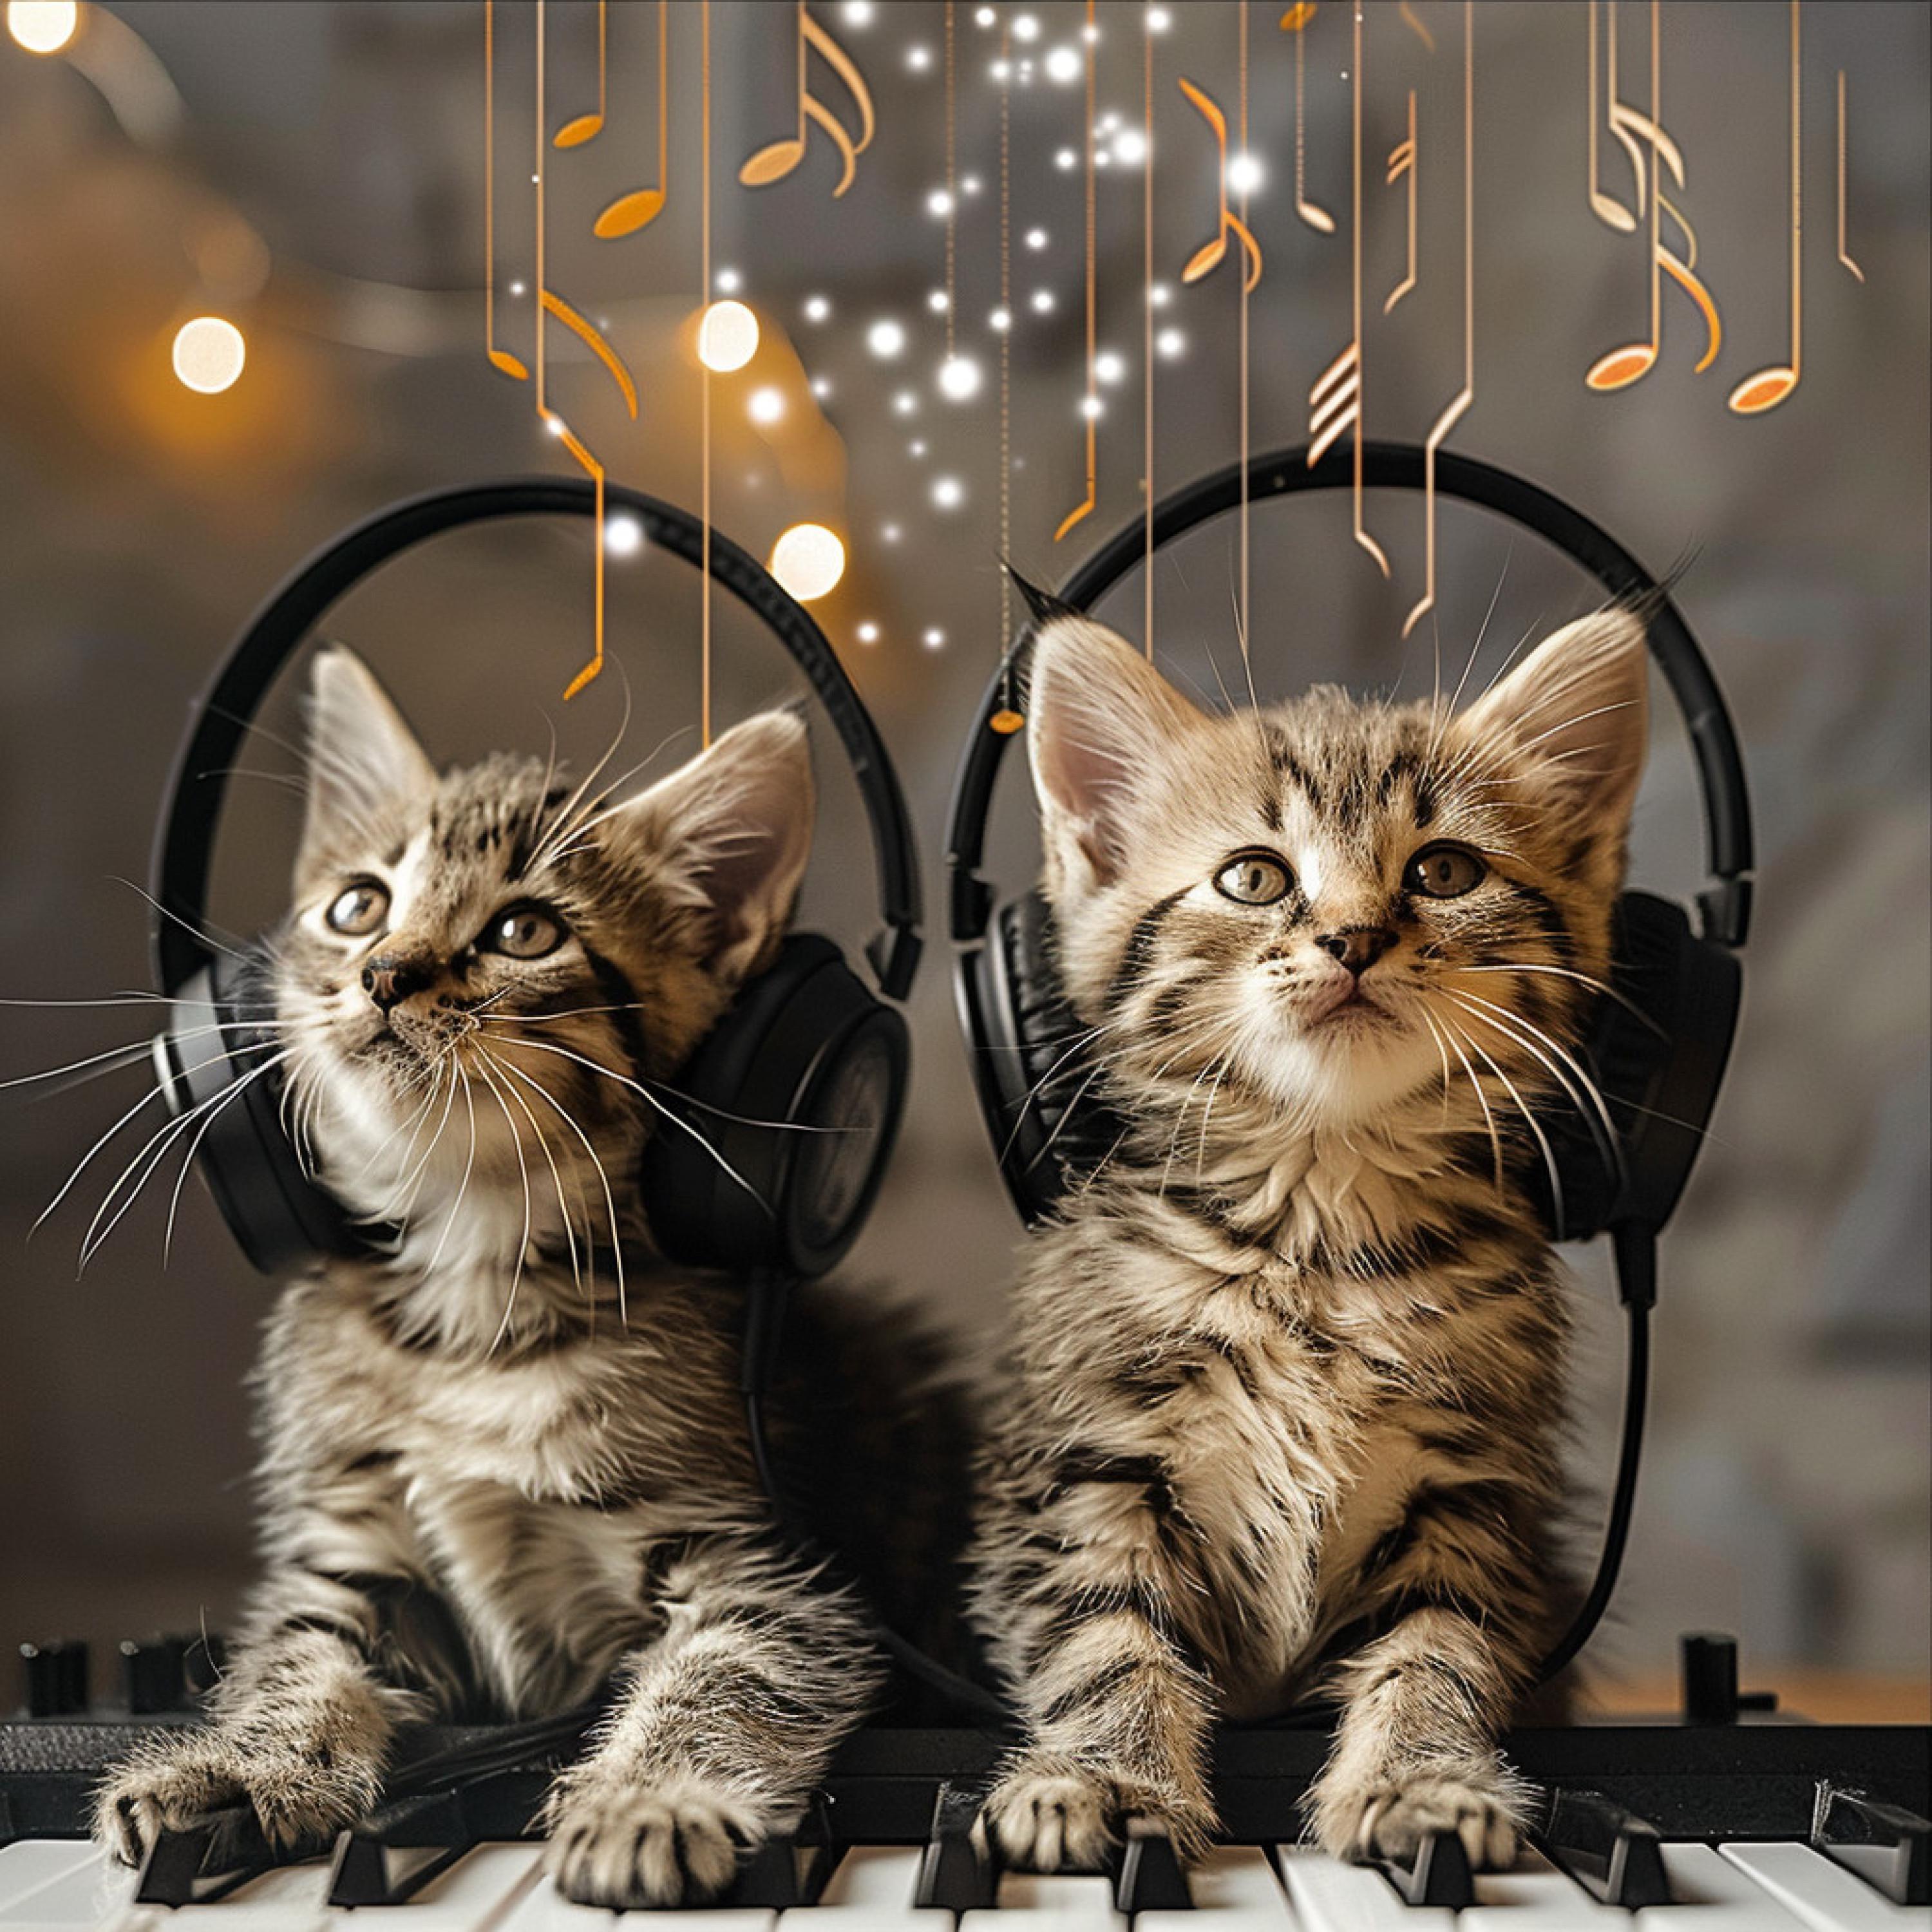 Music for Cats Deluxe - Relaxation Chords for Cats